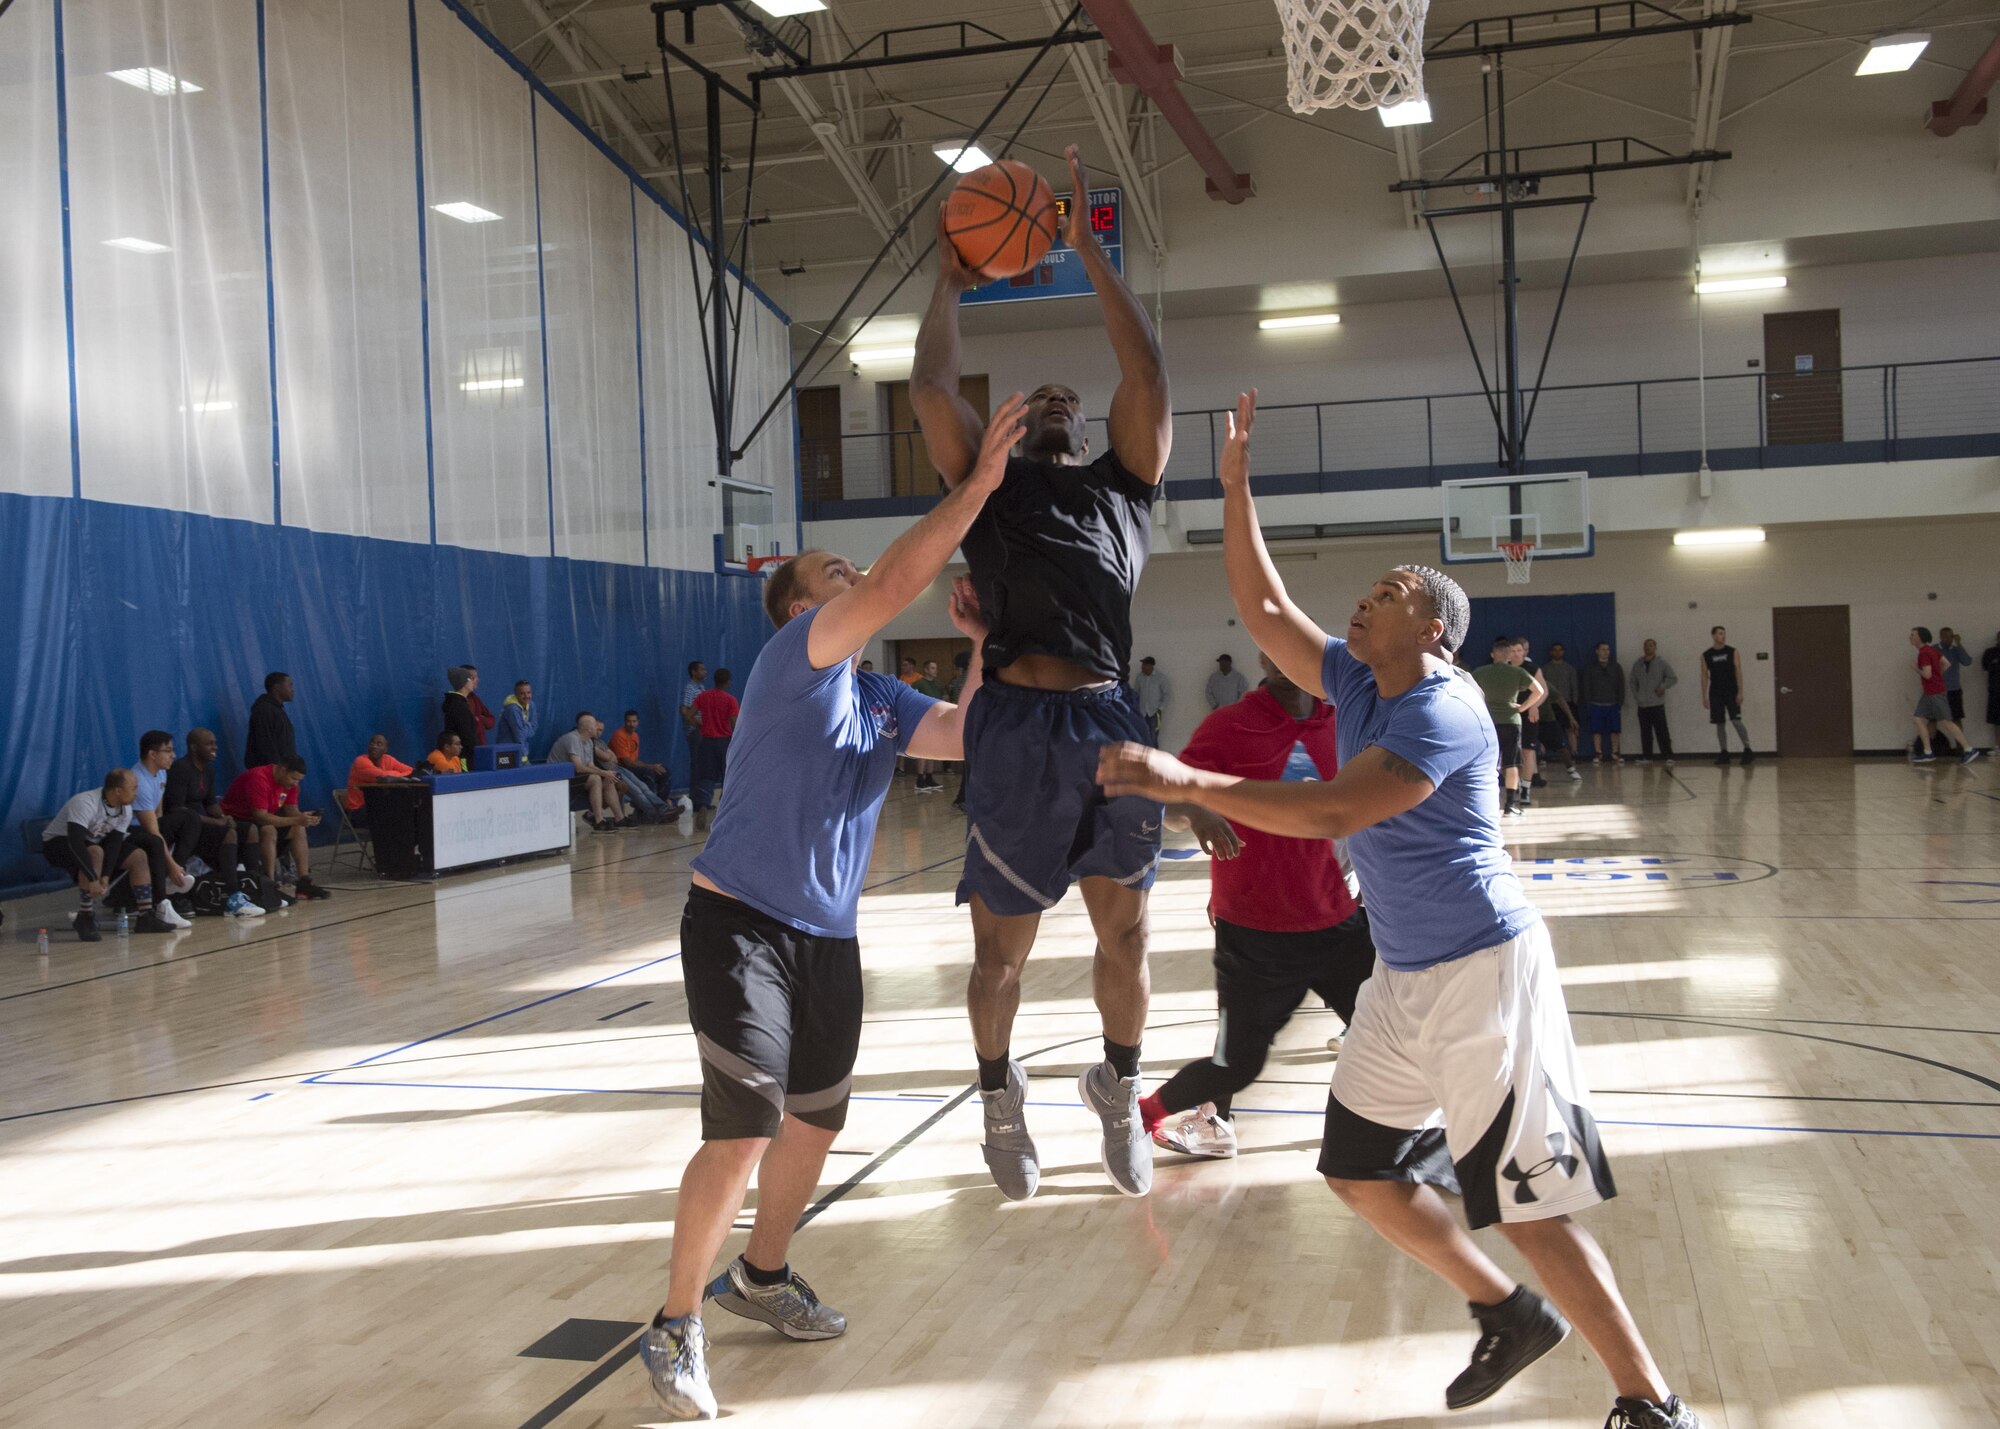 Airmen play a game of basketball during the 49th Wing Sports Day, March 17, 2017 at Holloman Air Force Base, N.M. Sports Day started off with a wing run, and continued with a number of events including volleyball, basketball, dodgeball and many more. (U.S. Air Force photo by Senior Airman Emily Kenney)